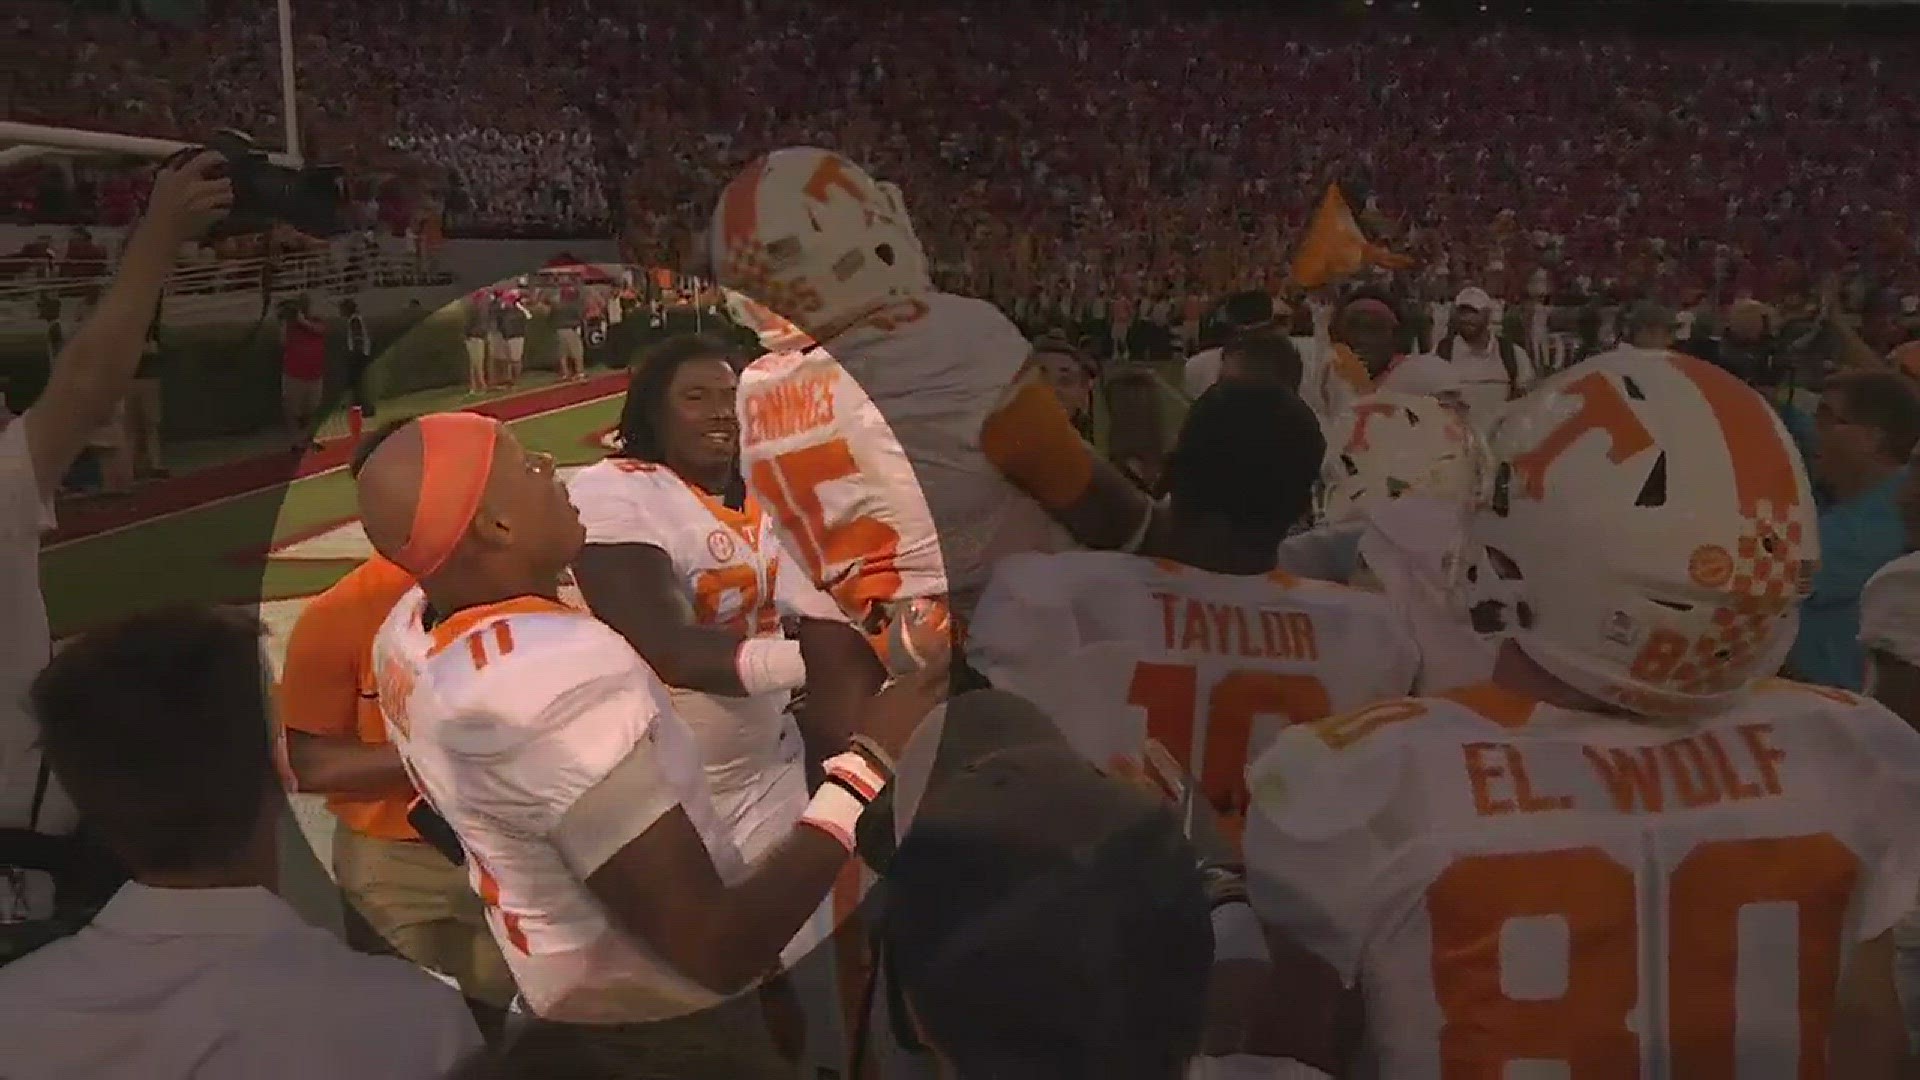 After catching the Hail Mary to beat Georgia, Jauan Jennings chucked the ball to the sideline. Josh Dobbs made sure to recover it.